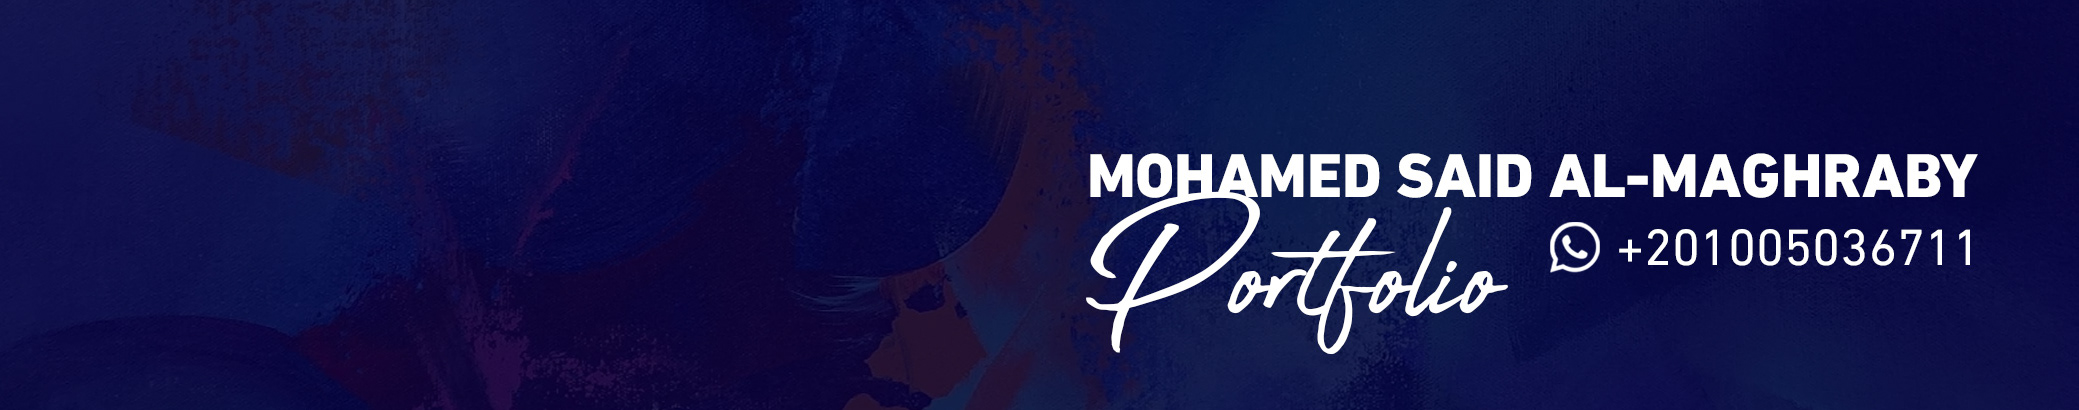 Mohamed Saiid Al-Maghraby's profile banner